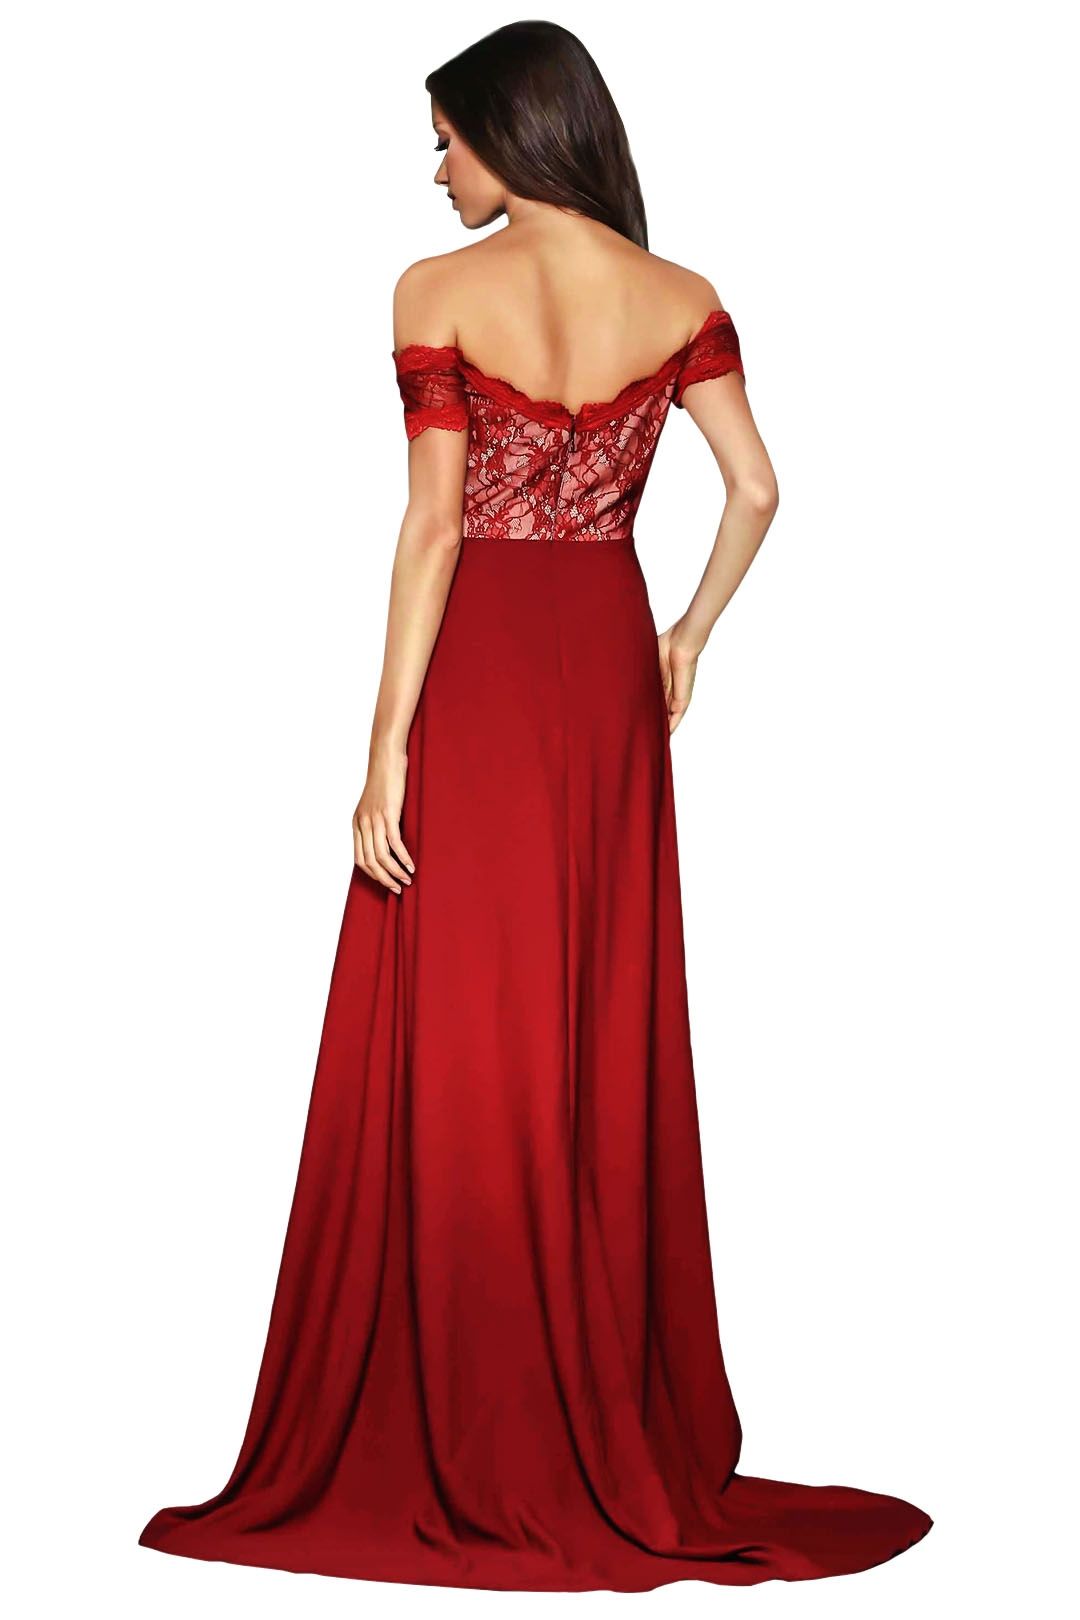 Elle Zeitoune - Montana Gown - Red - Back